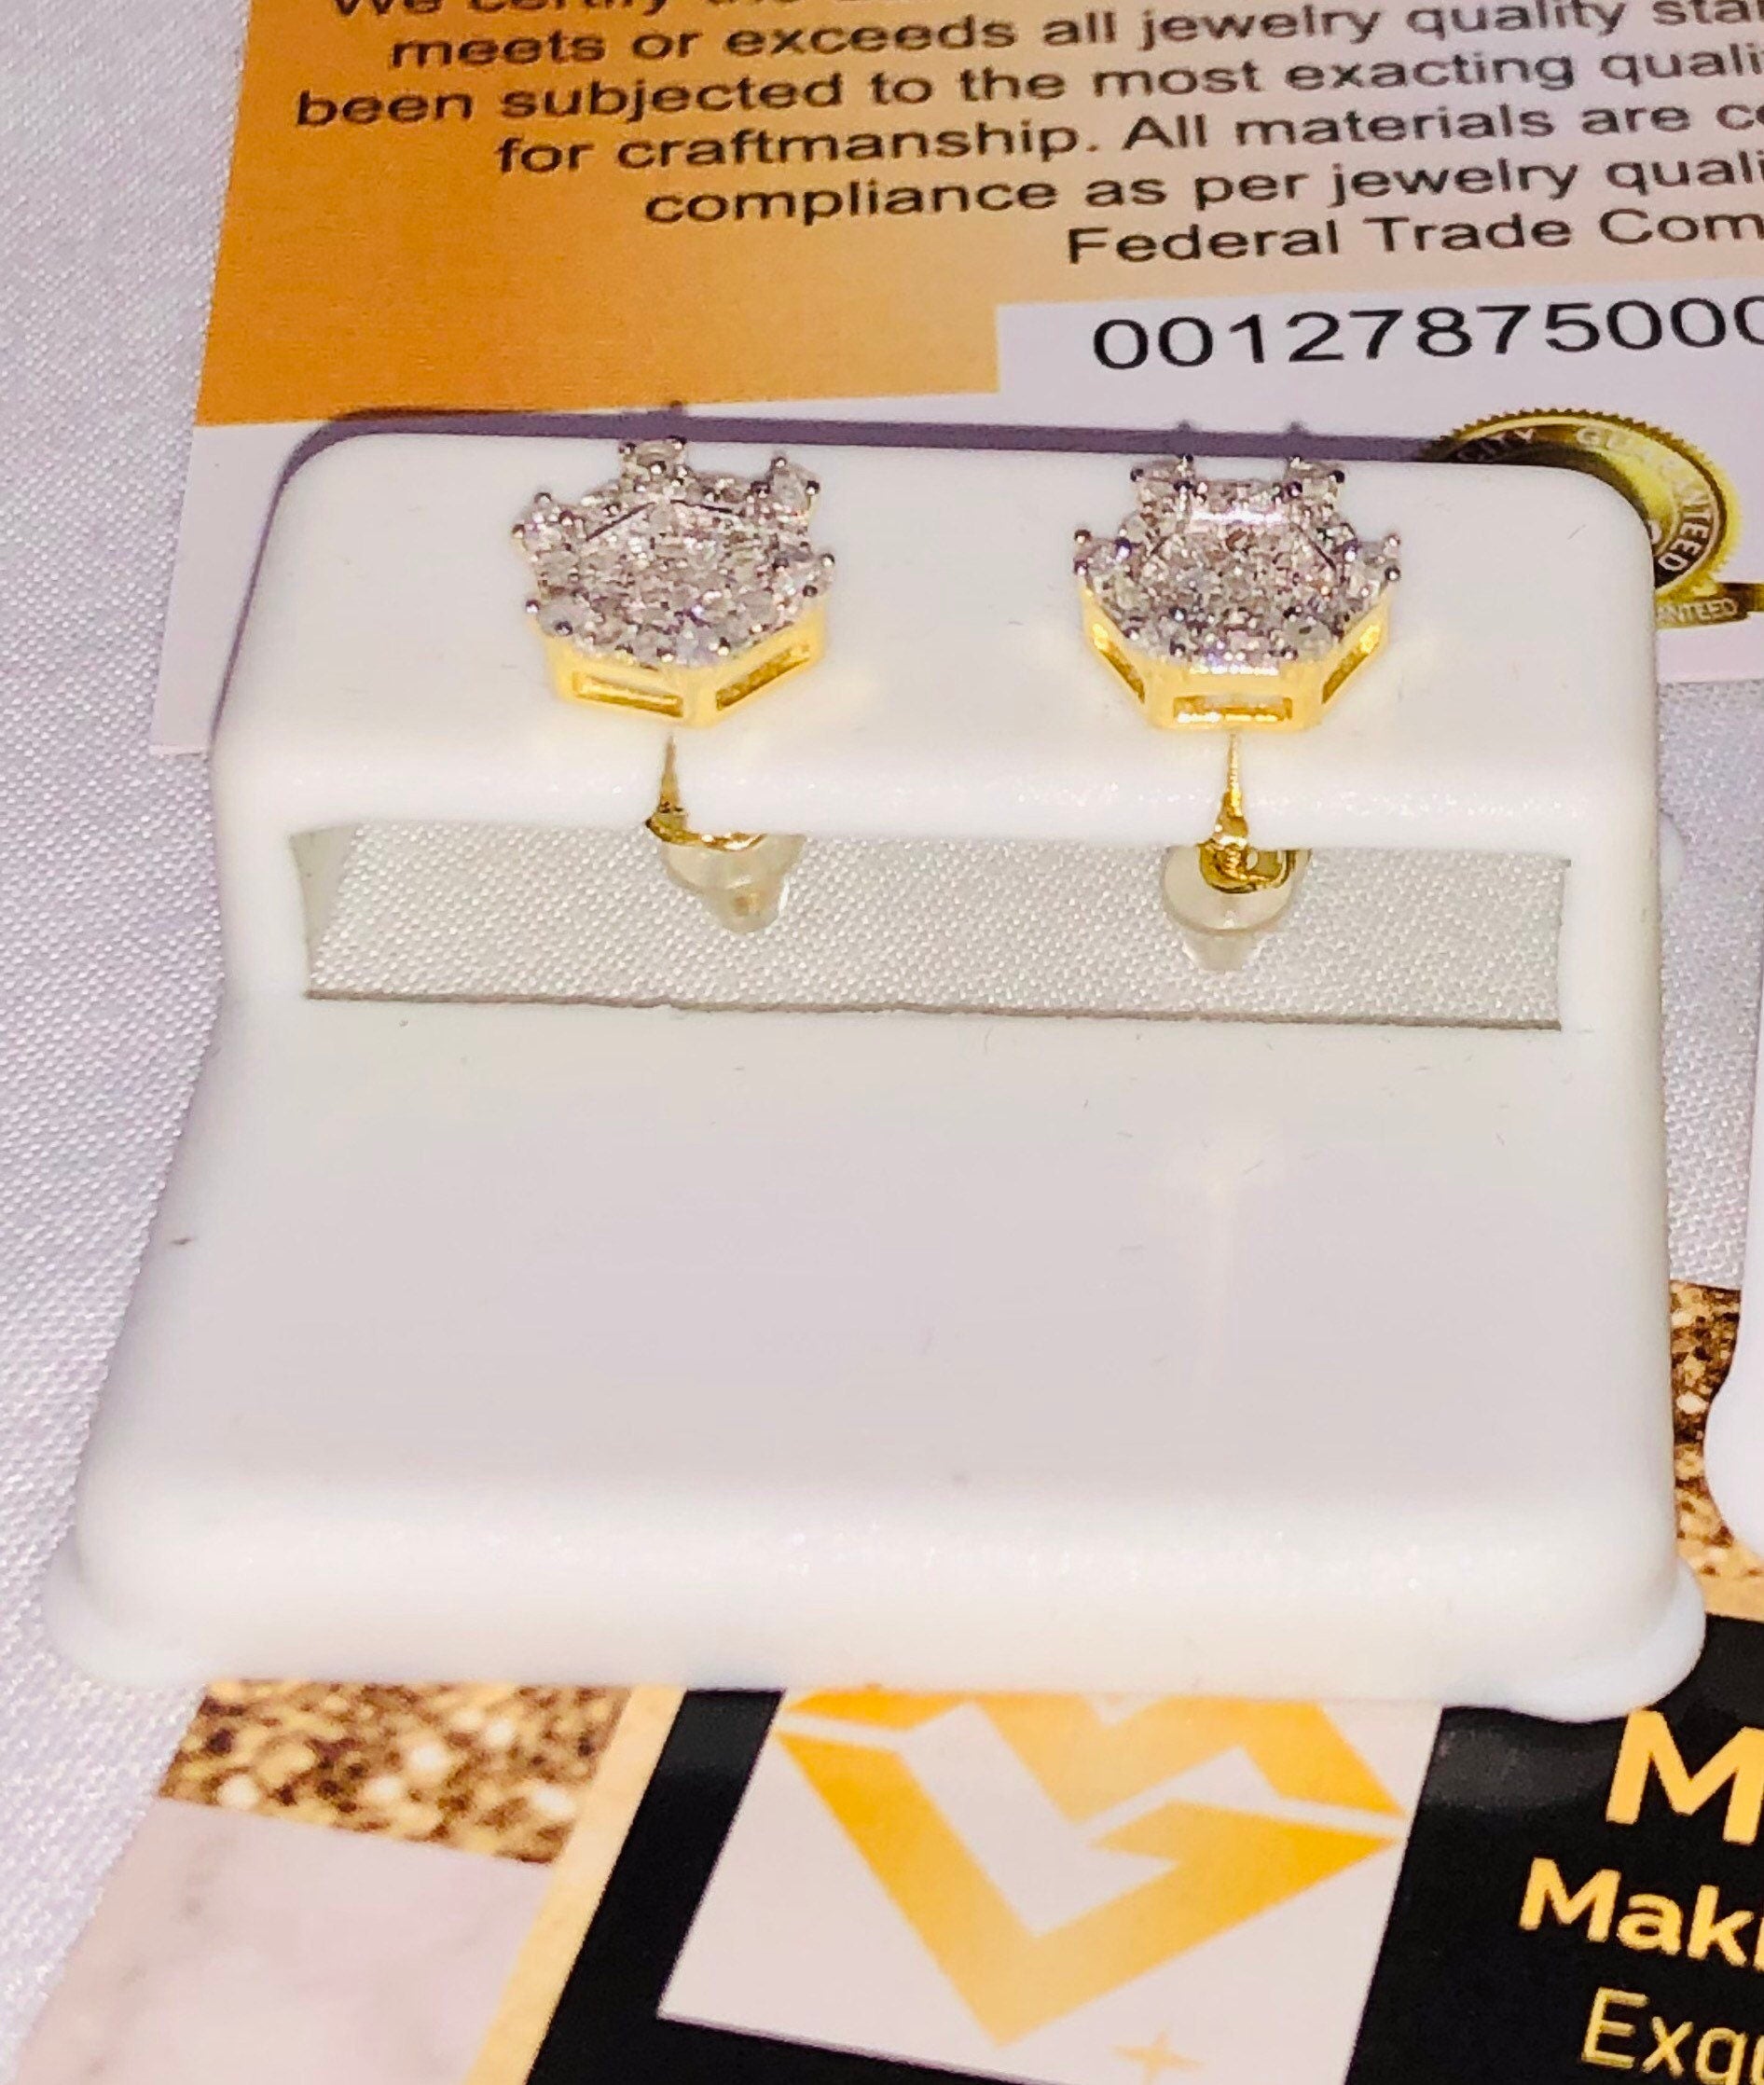 10k yellow gold vermeil real diamond earrings, screw back authentic natural diamond studs for men, free shipping, authenticity card included